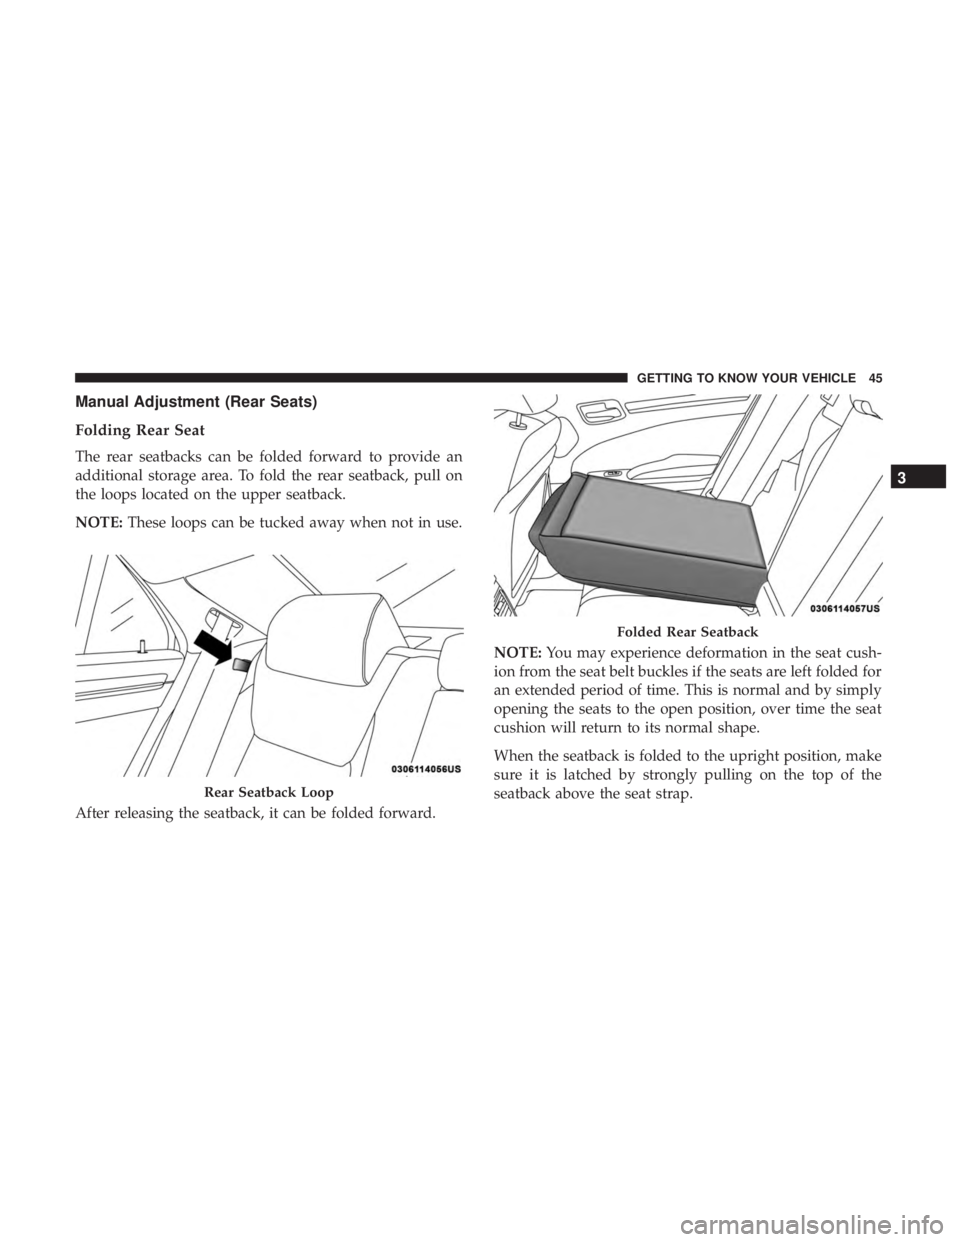 CHRYSLER 300 2019  Owners Manual Manual Adjustment (Rear Seats)
Folding Rear Seat
The rear seatbacks can be folded forward to provide an
additional storage area. To fold the rear seatback, pull on
the loops located on the upper seatb